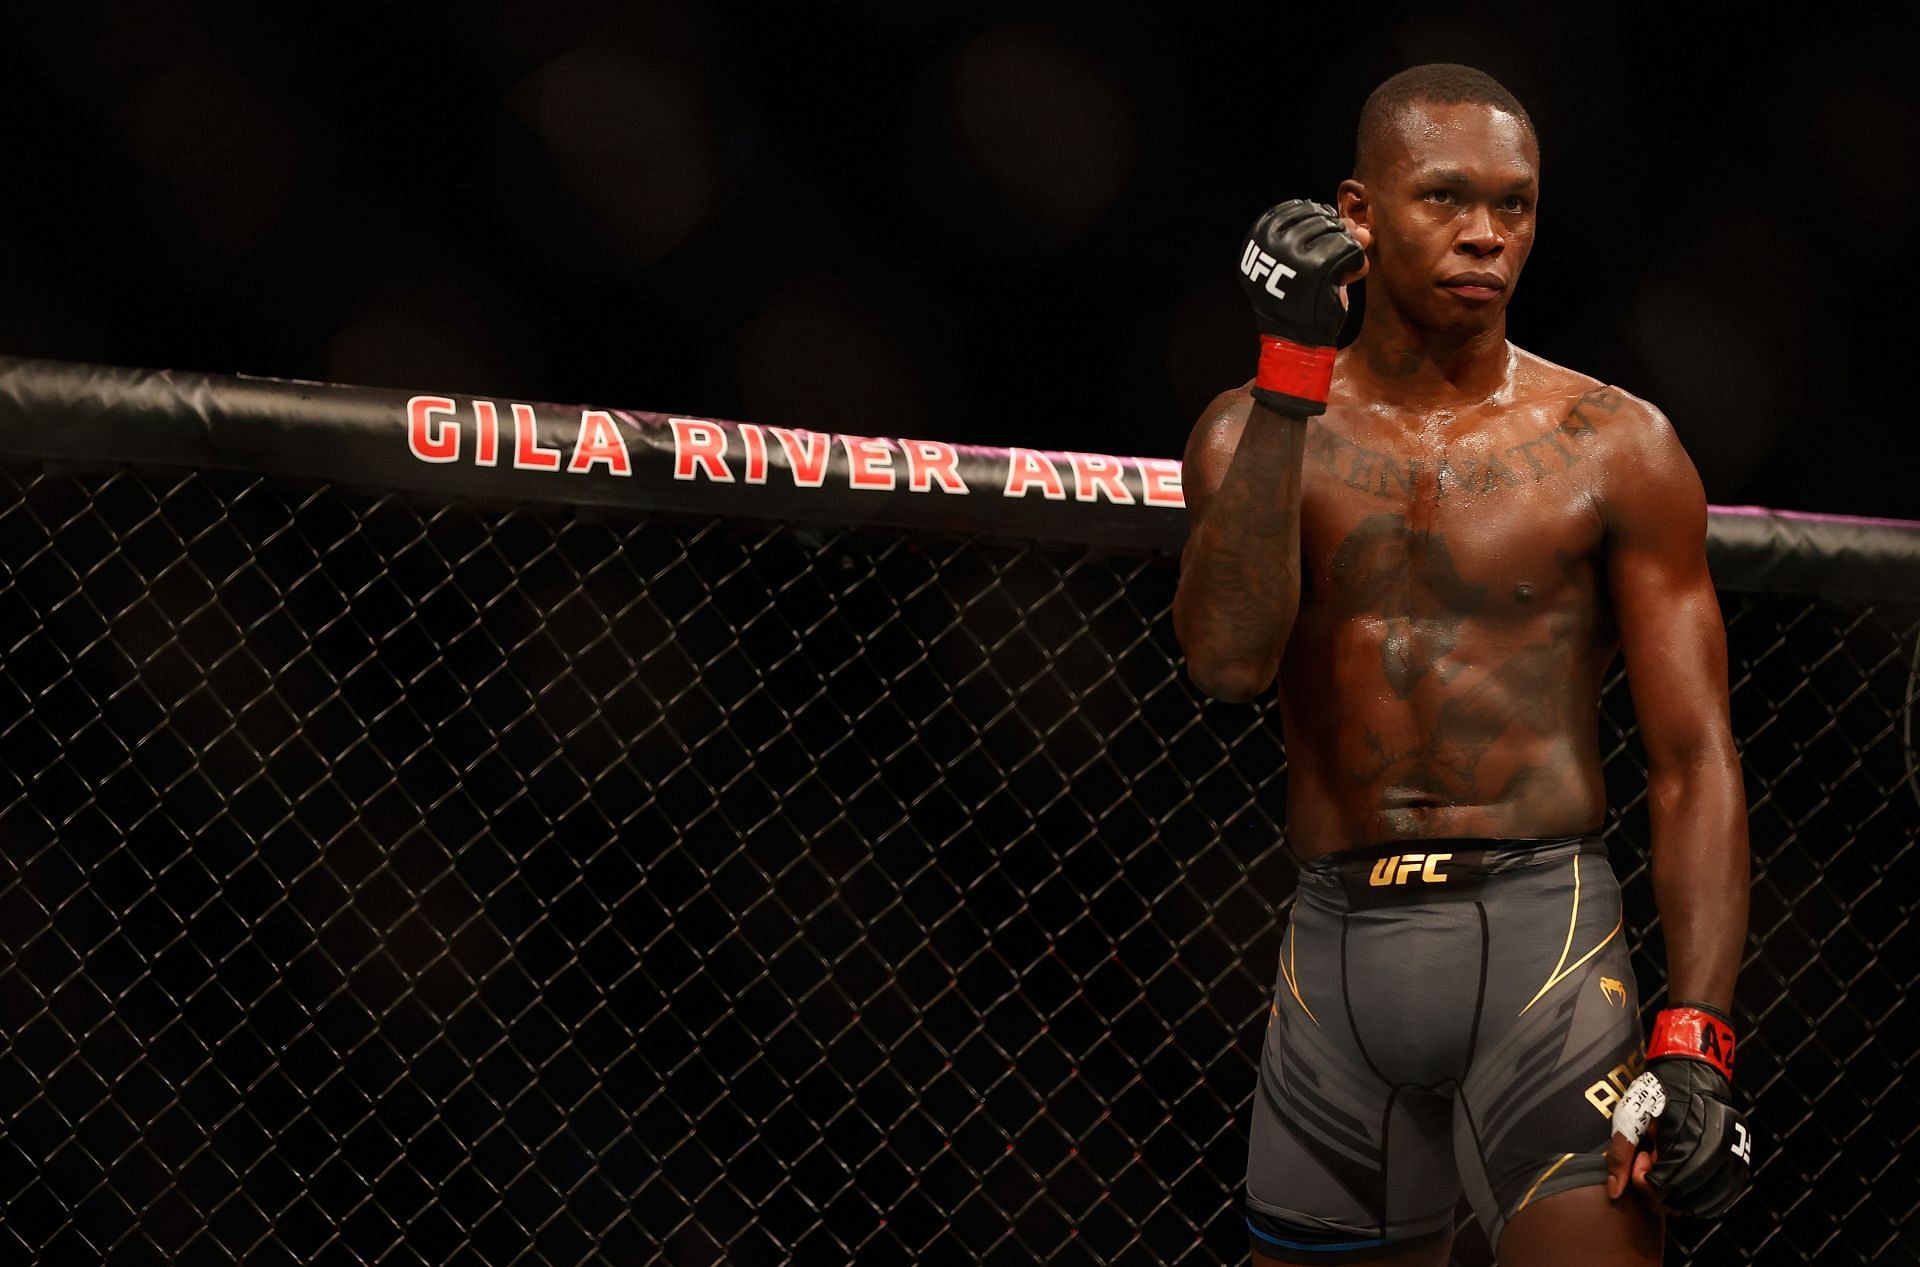 A fight to settle the score between Israel Adesanya and Jon Jones could be huge business for the UFC